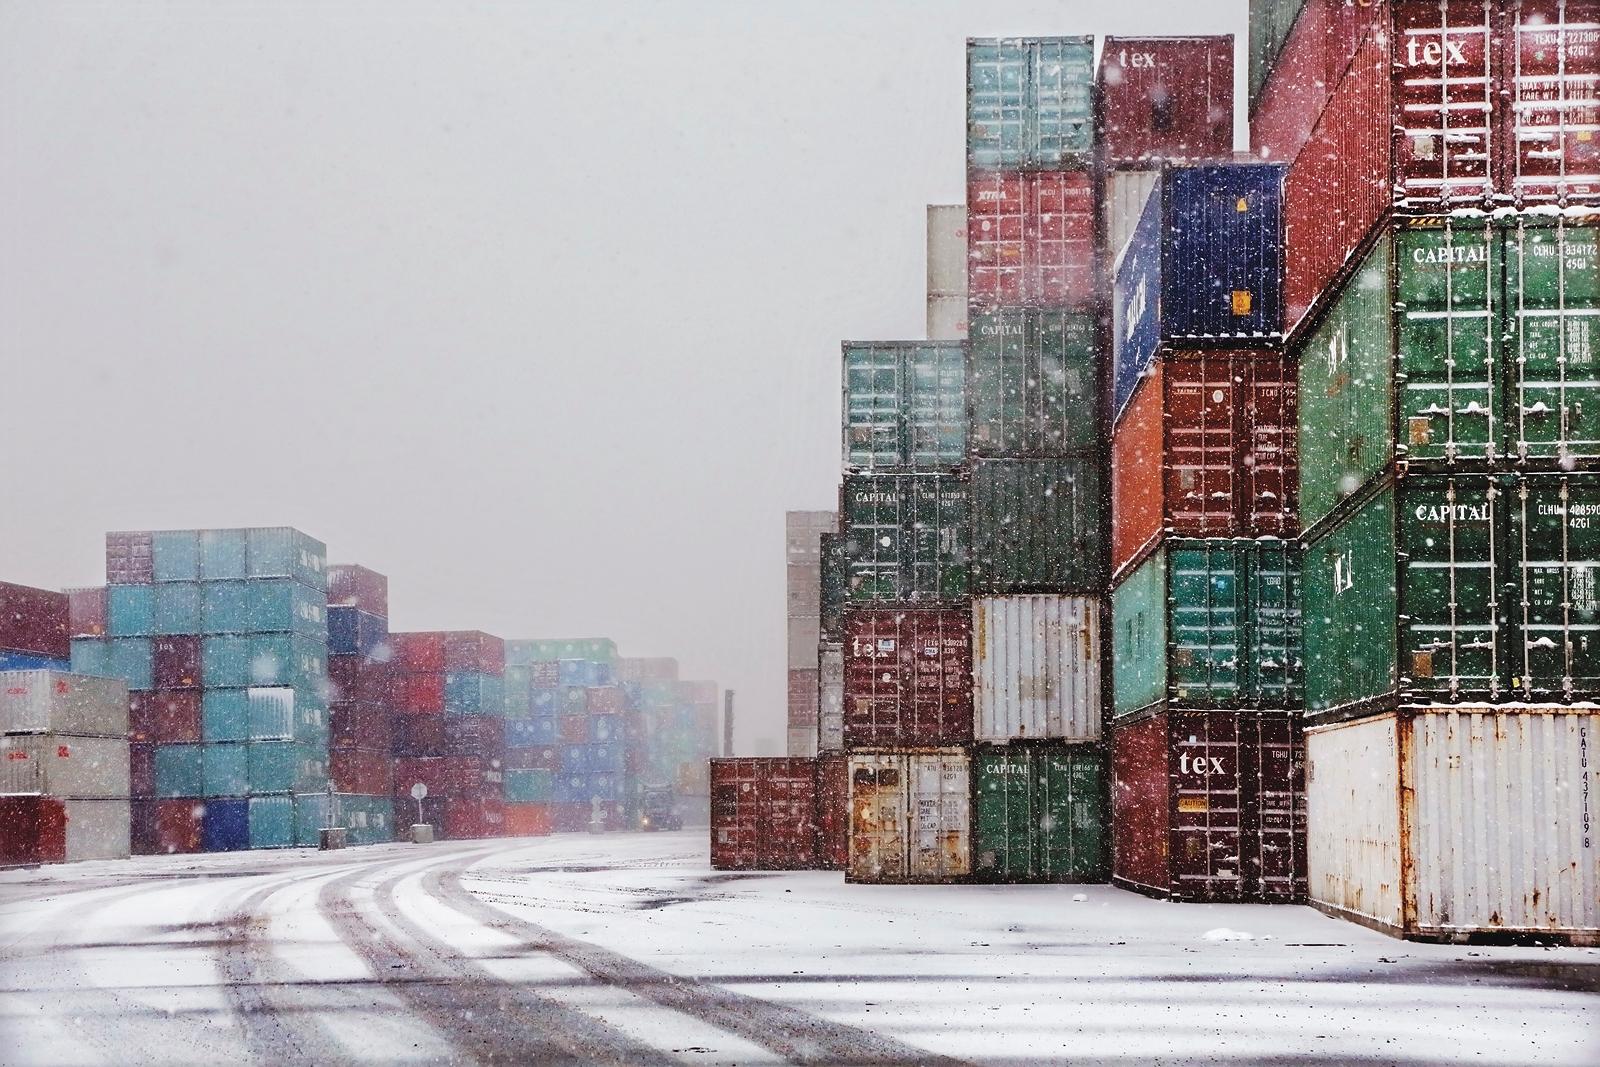 Boxes 3 - Shipping, Containers, Docks, Snow, Winter, Travel photography, Print